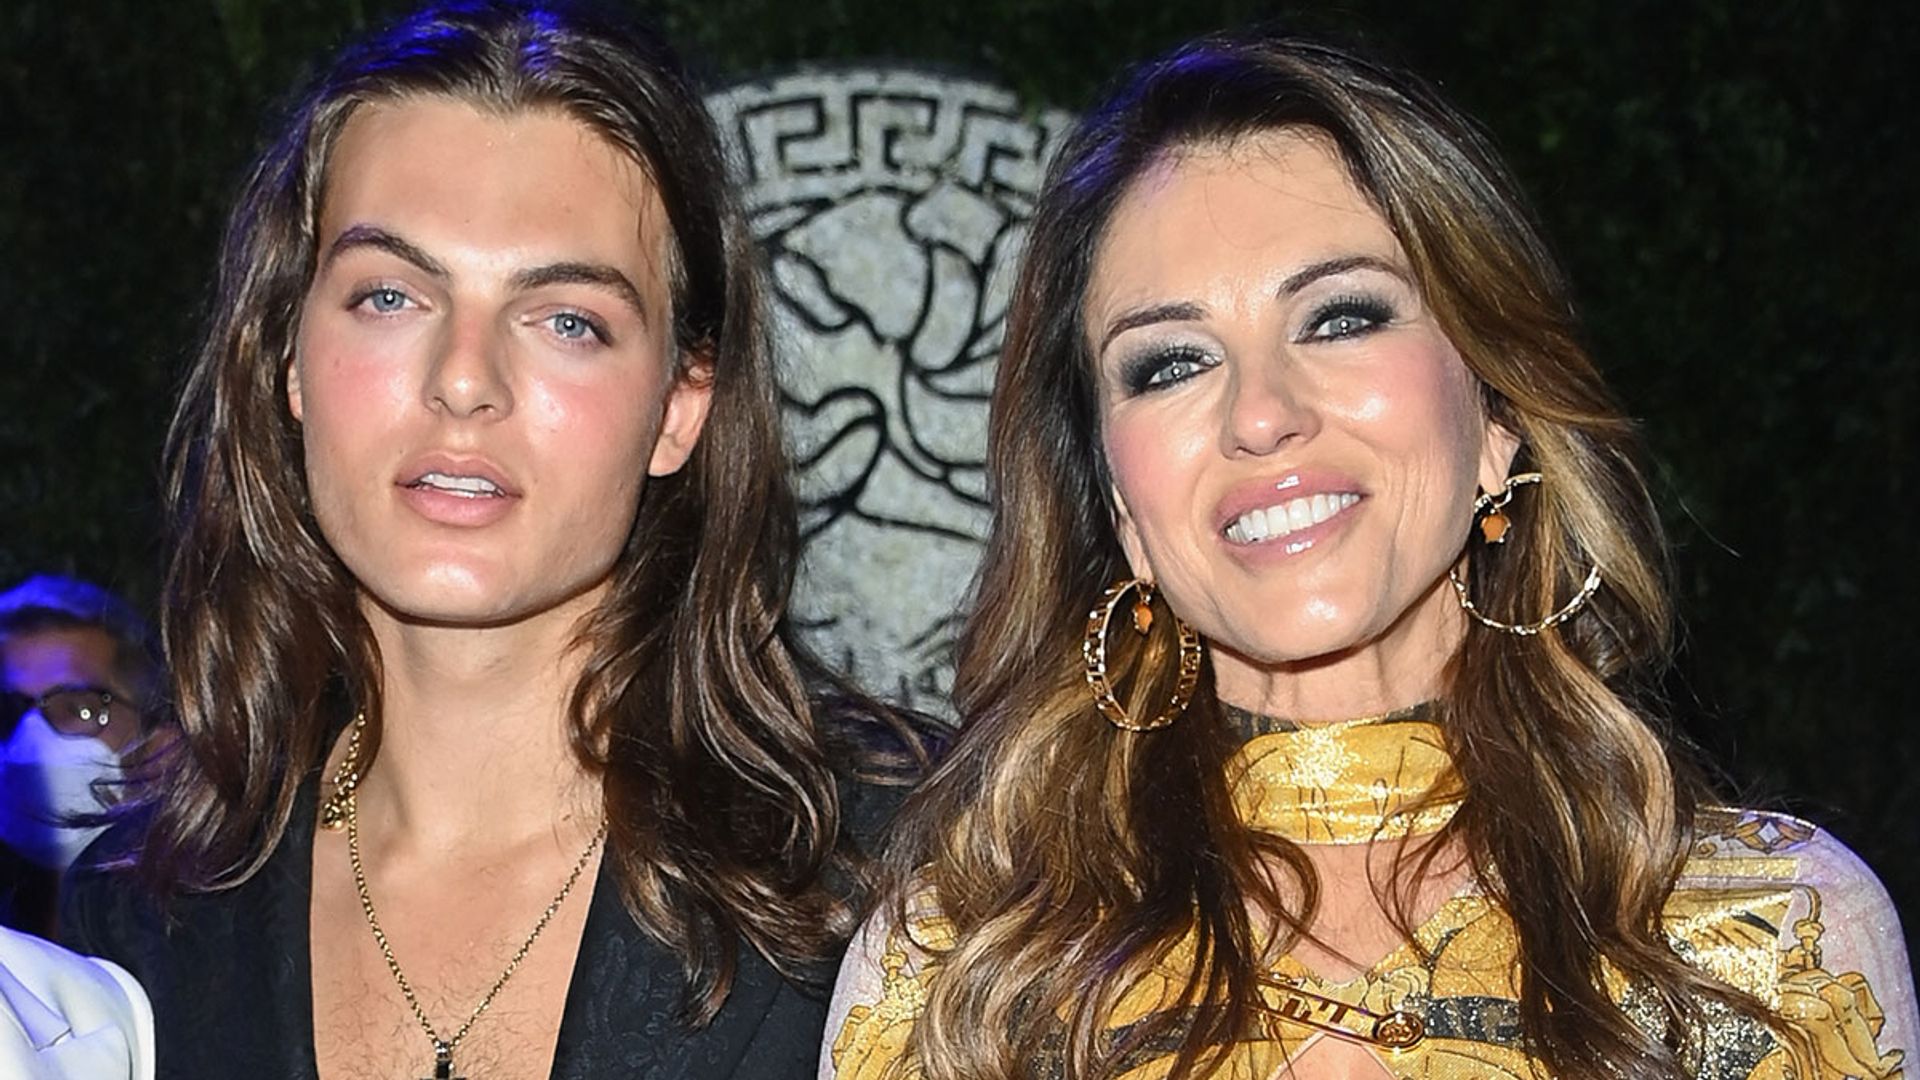 Elizabeth Hurley's joy at son Damian revealed in latest photo - and fans react